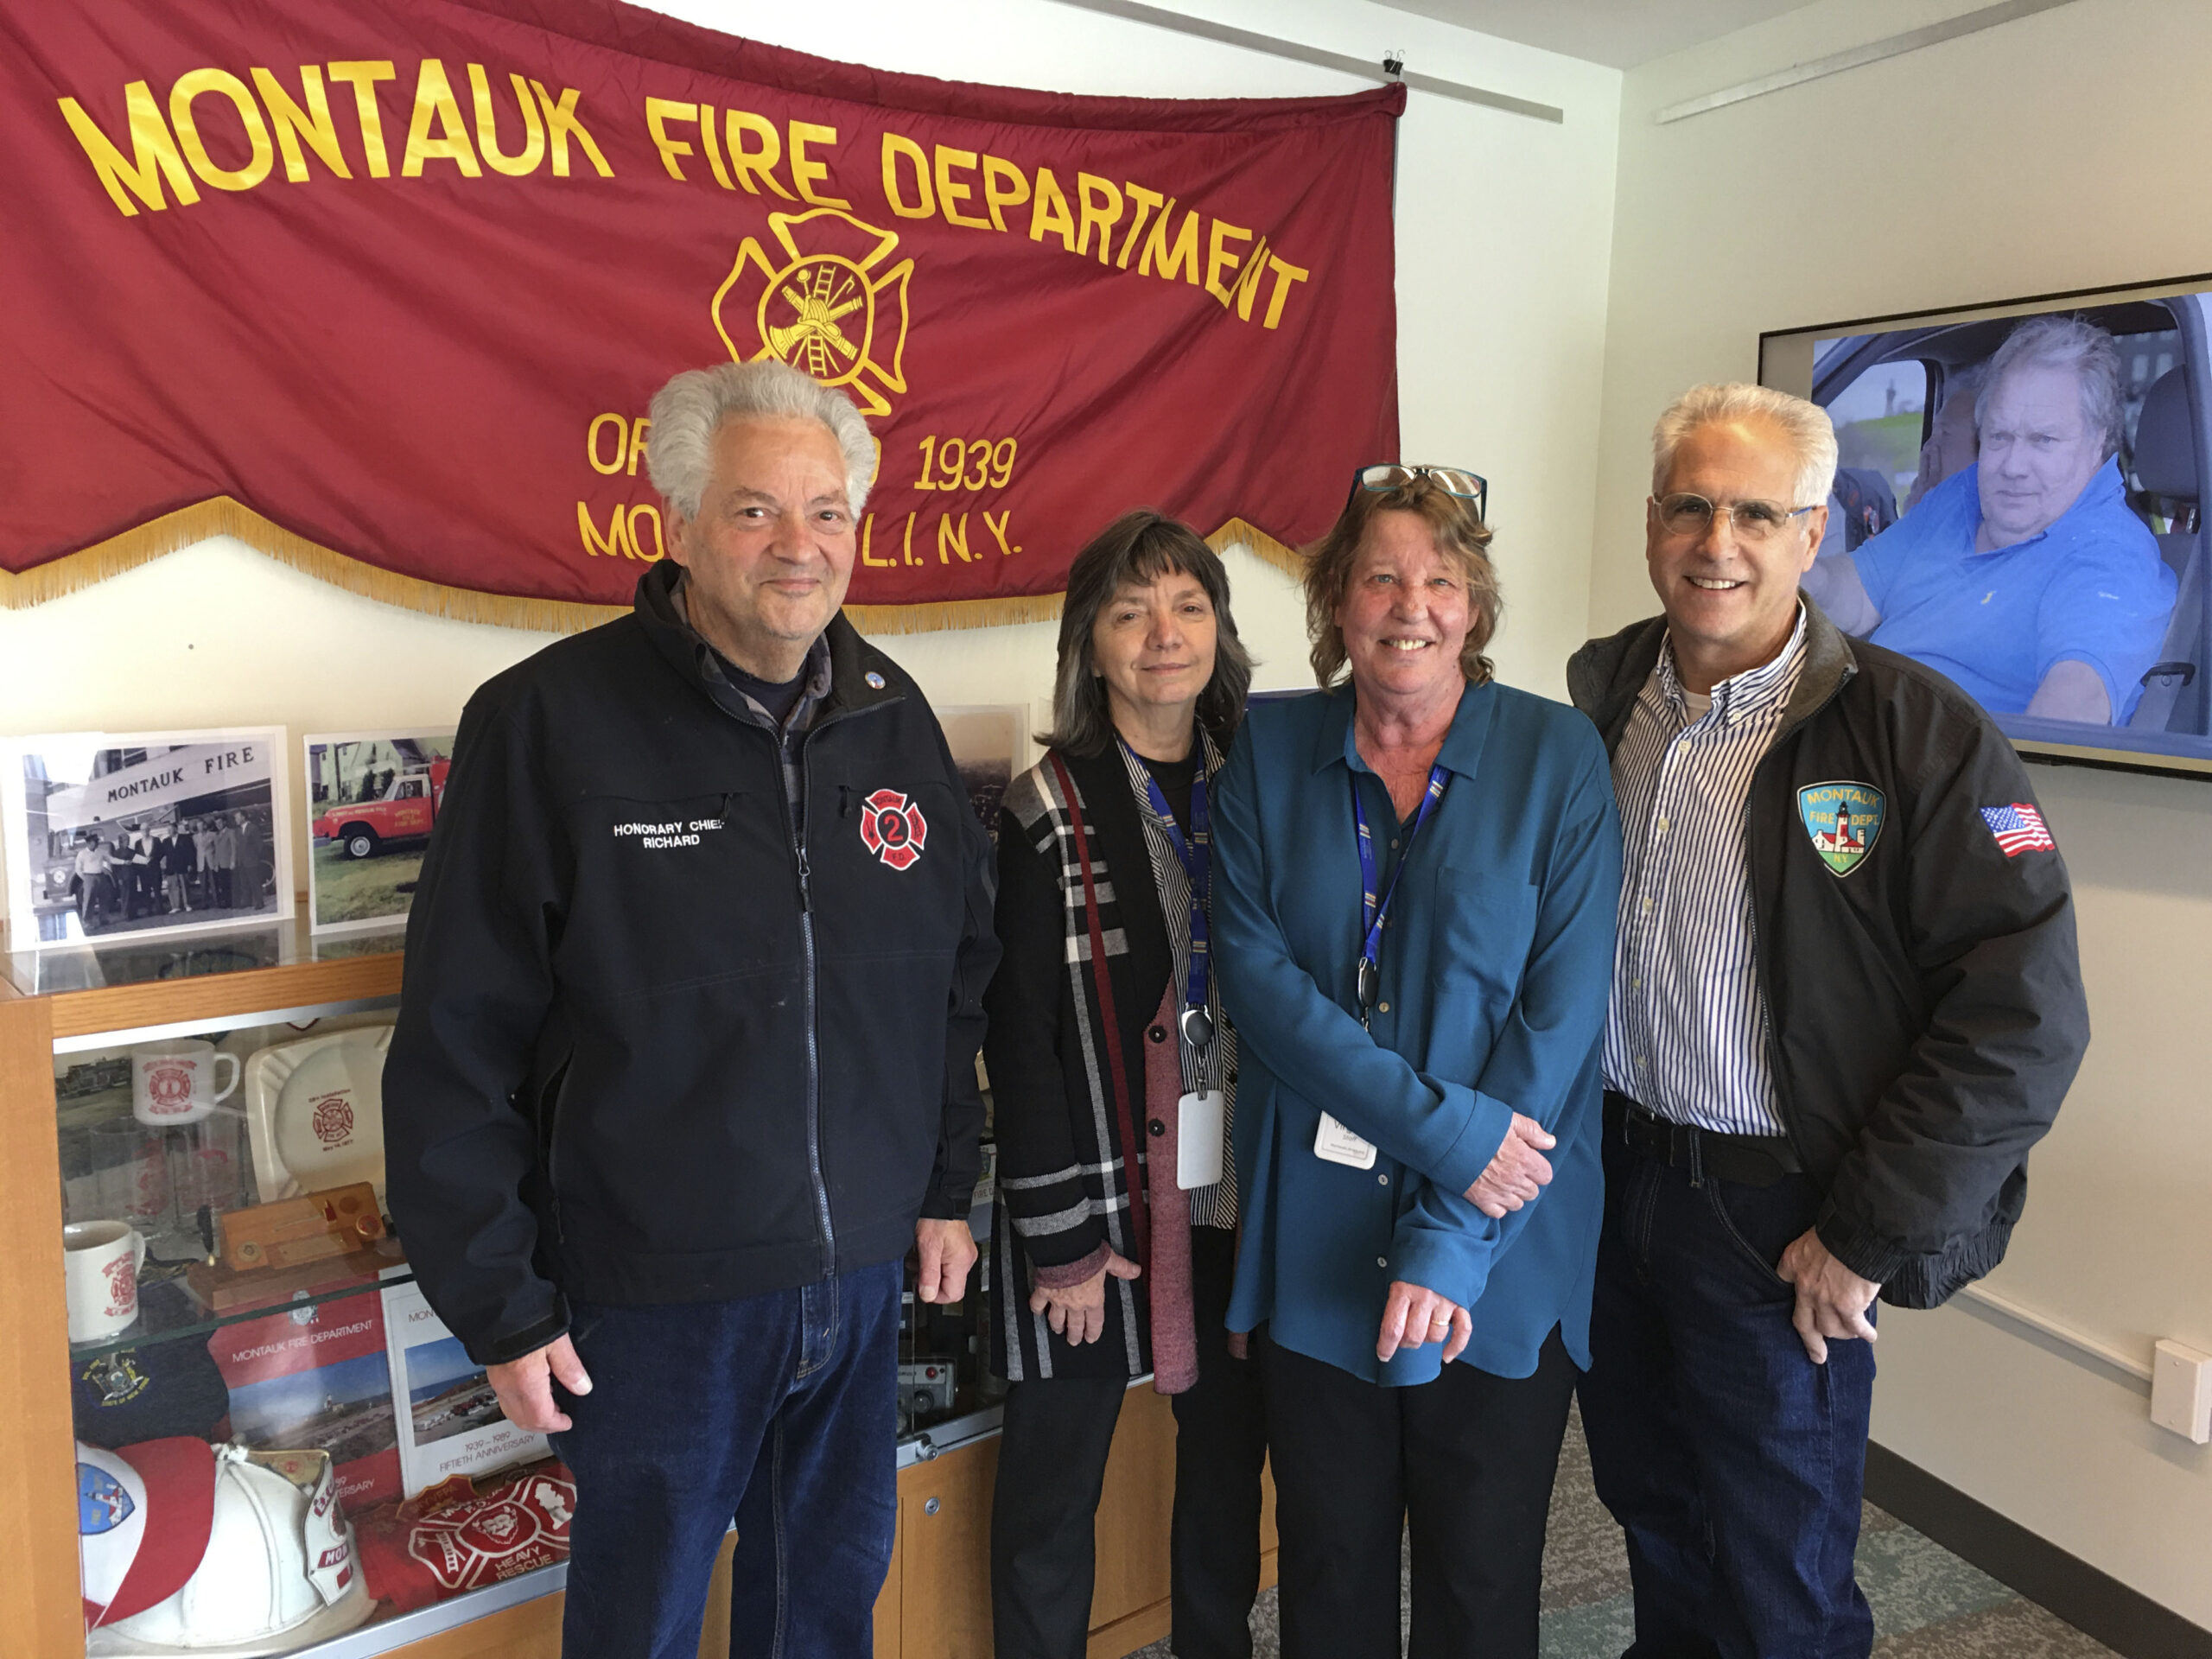 The Montauk Library is currently exhibiting an historic display honoring the men and women of the Montauk Fire Department.  Many of the photos and exhibits were lent to the library by Ex-Chief Tom Grenci (the Department Historian), and Honorary Chief Richard Lewin, professional photographer and friend to the MFD for many years. Thank you also to Joan Lycke and Dick White for their contributions, and to Montauk Library’s Virginia Garrison and Kathleen Ernst for creating the presentation which will be on view at least through January 2023.   RICHARD LEWIN